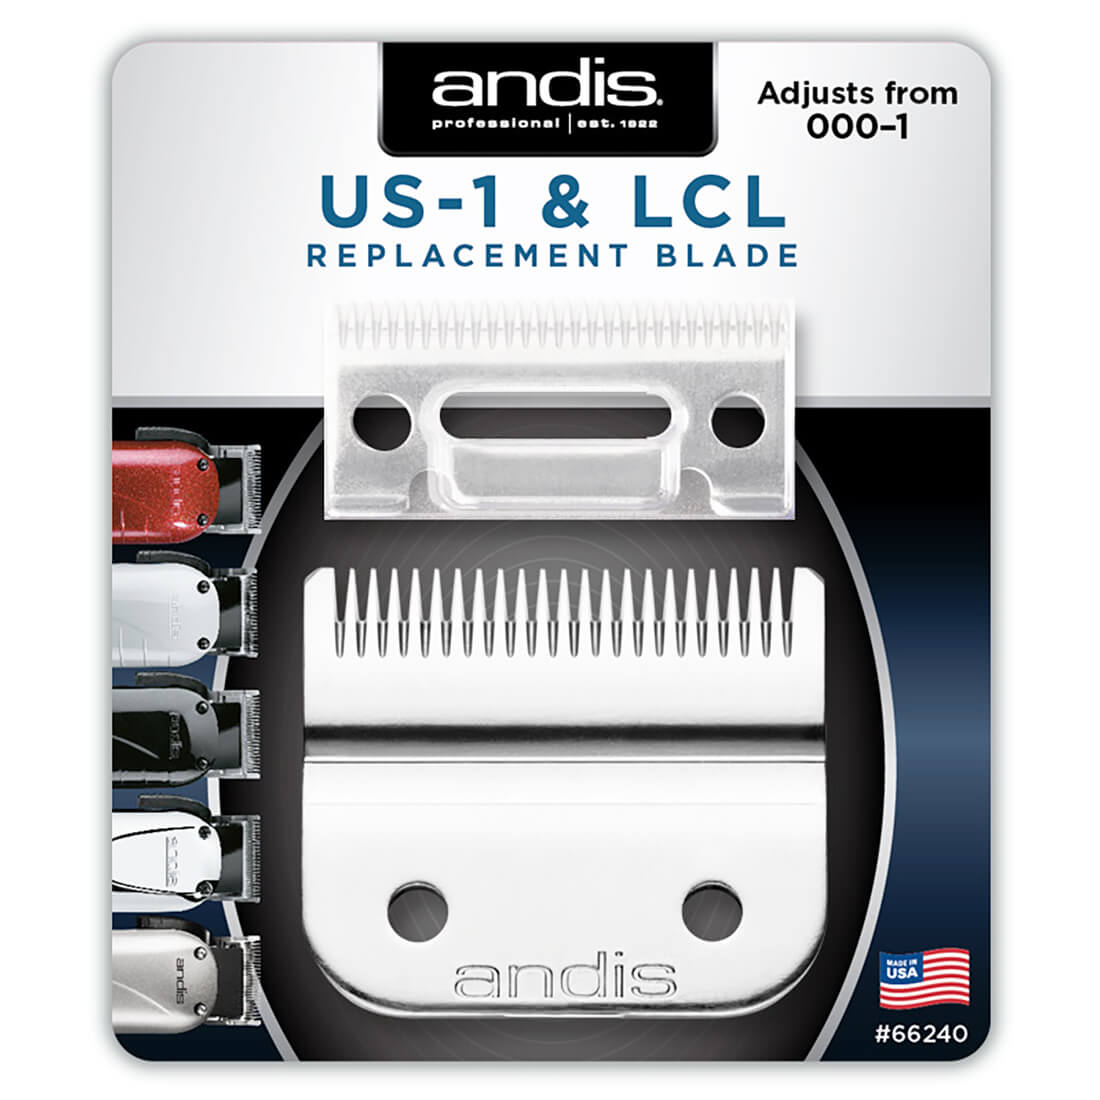 Andis US-1 & LCL Replacement Blade Set (Envy) #66240